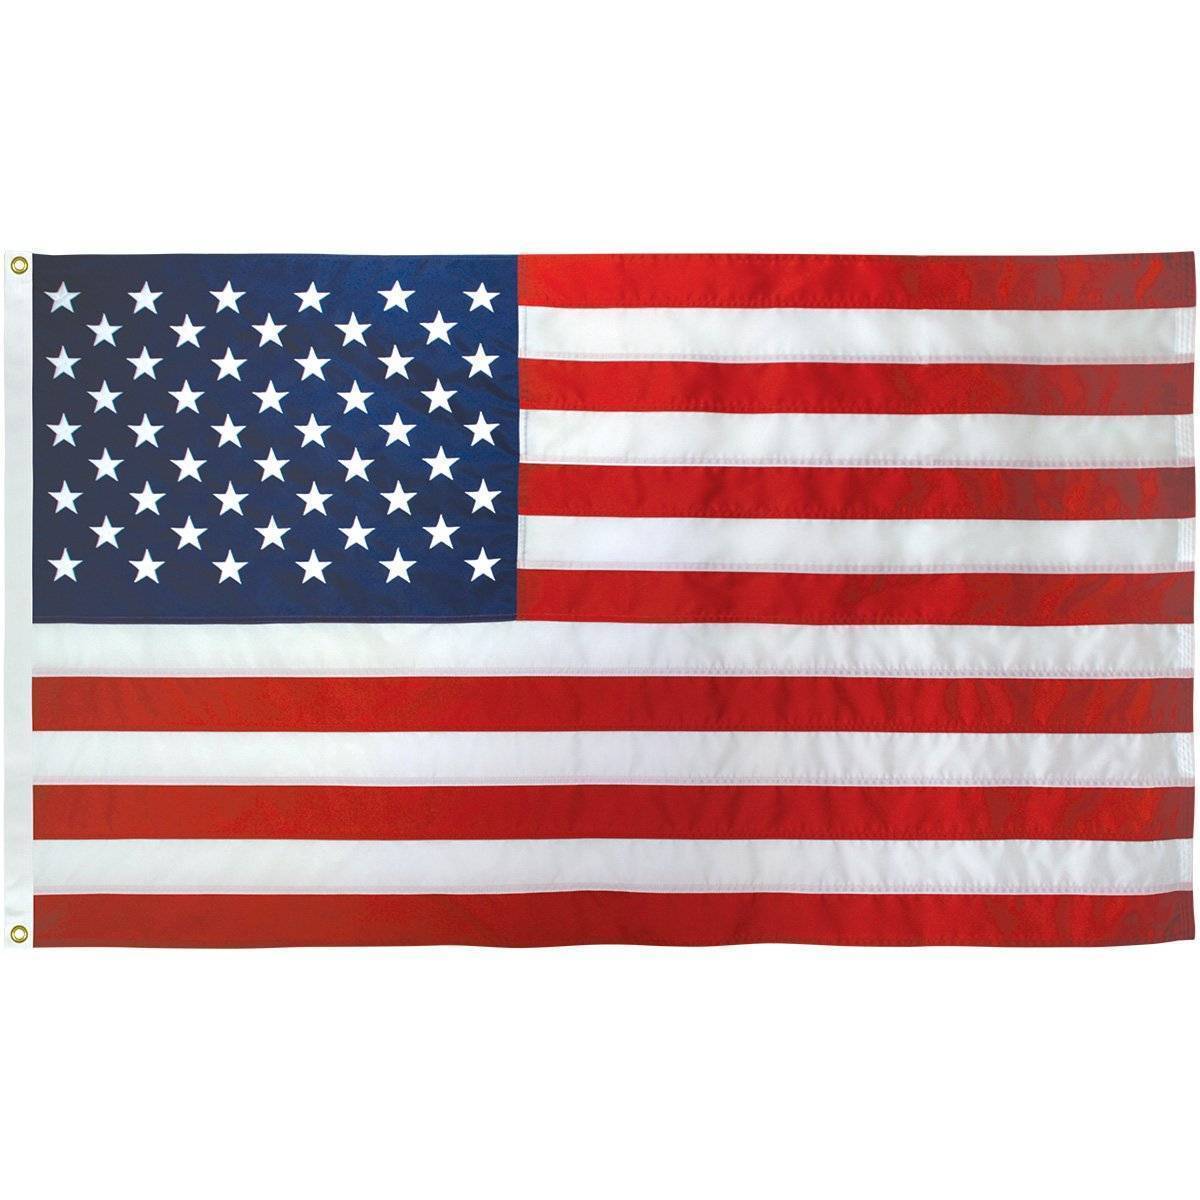 ROTERDON American USA US Patriotic Flag 3x5 Ft The Star and Stripe Polyester Lightweight Banner Flags 